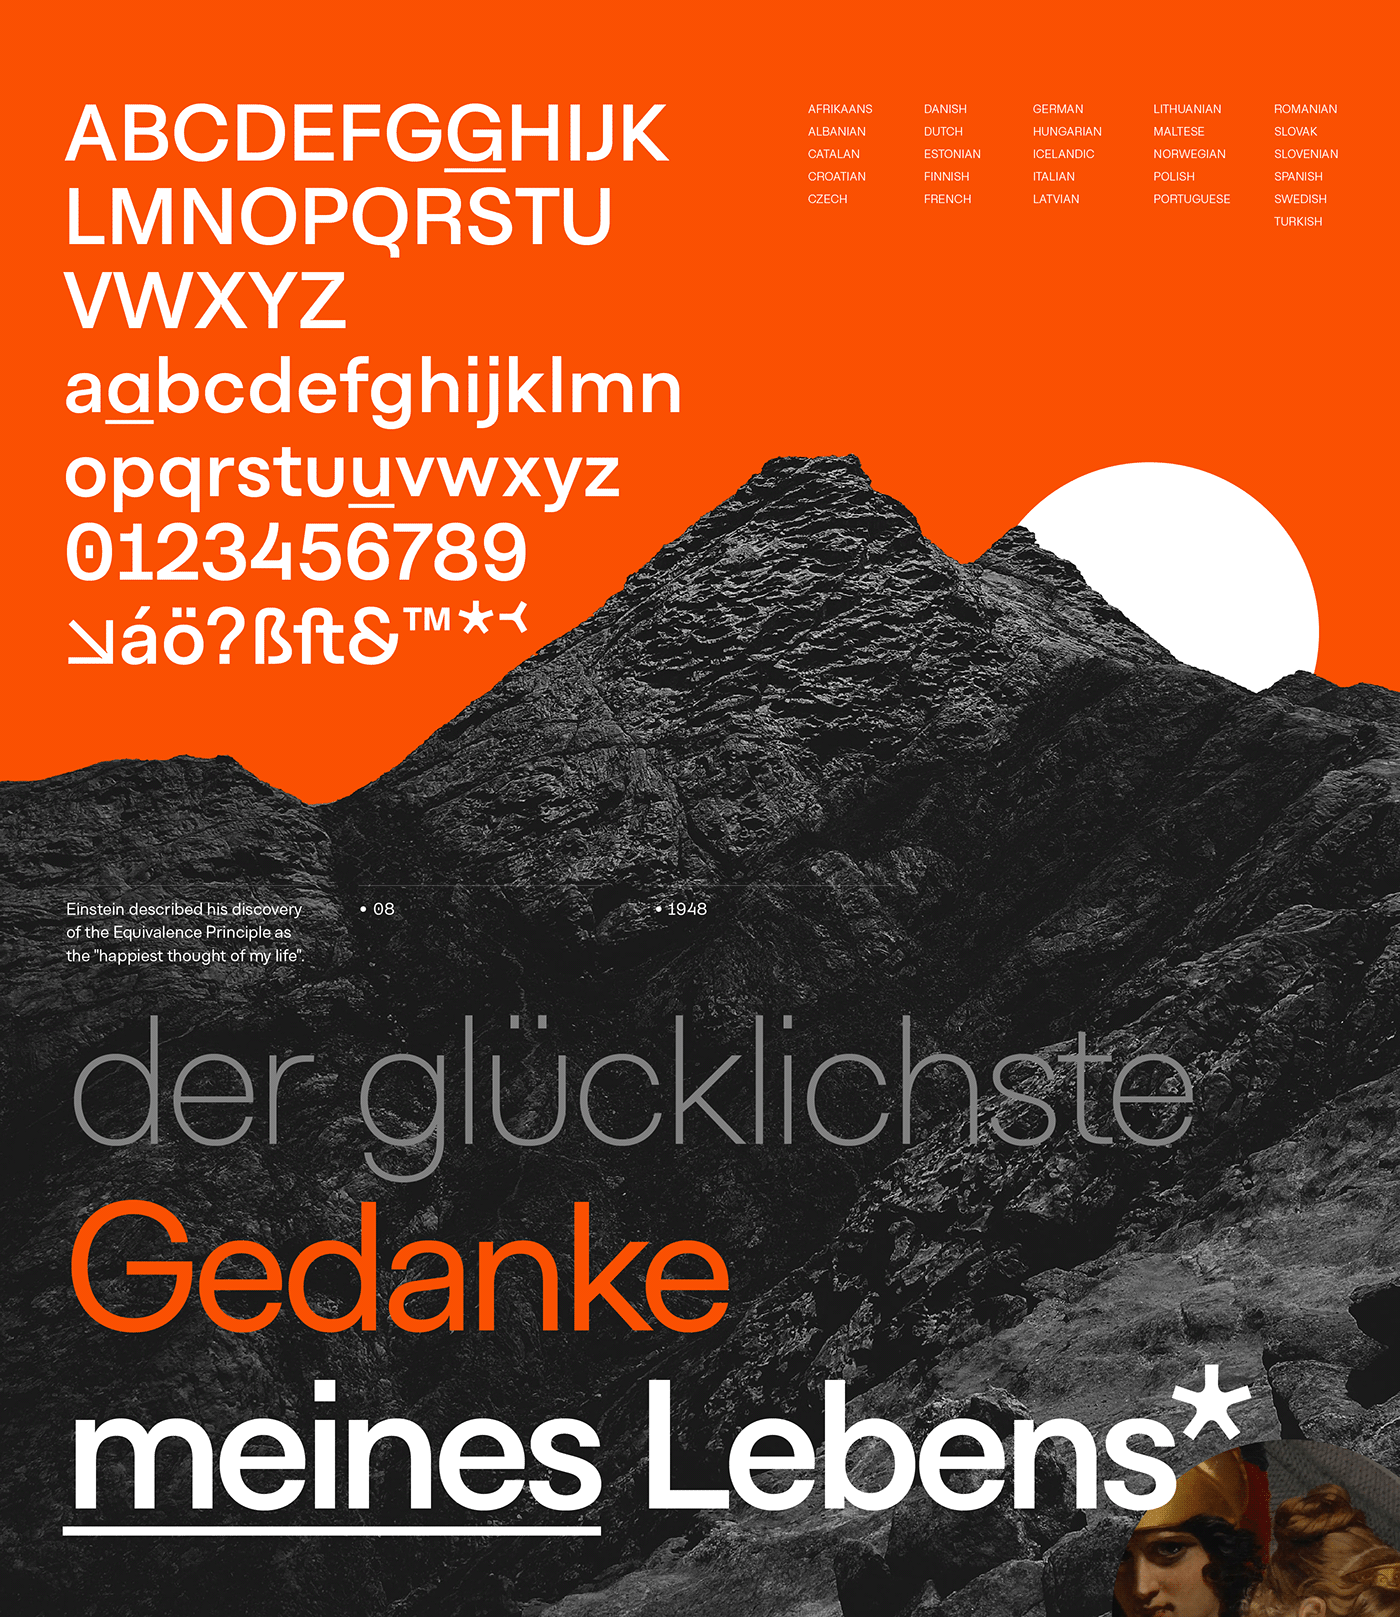 branding  font freefont grotesk grotesque Typeface typography  